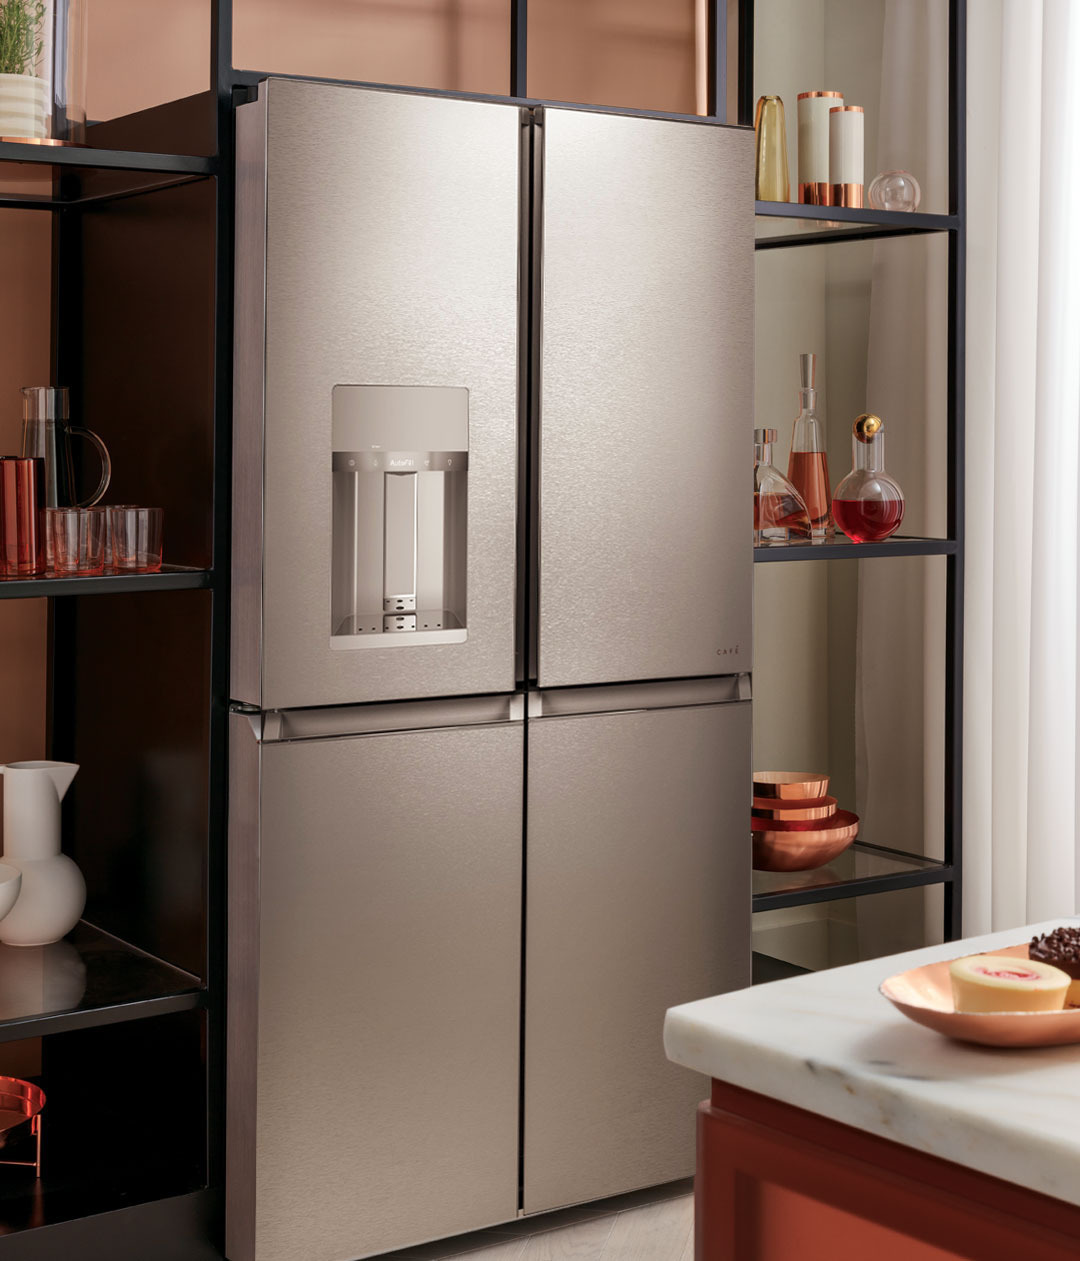 modern glass refrigerator with open shelving